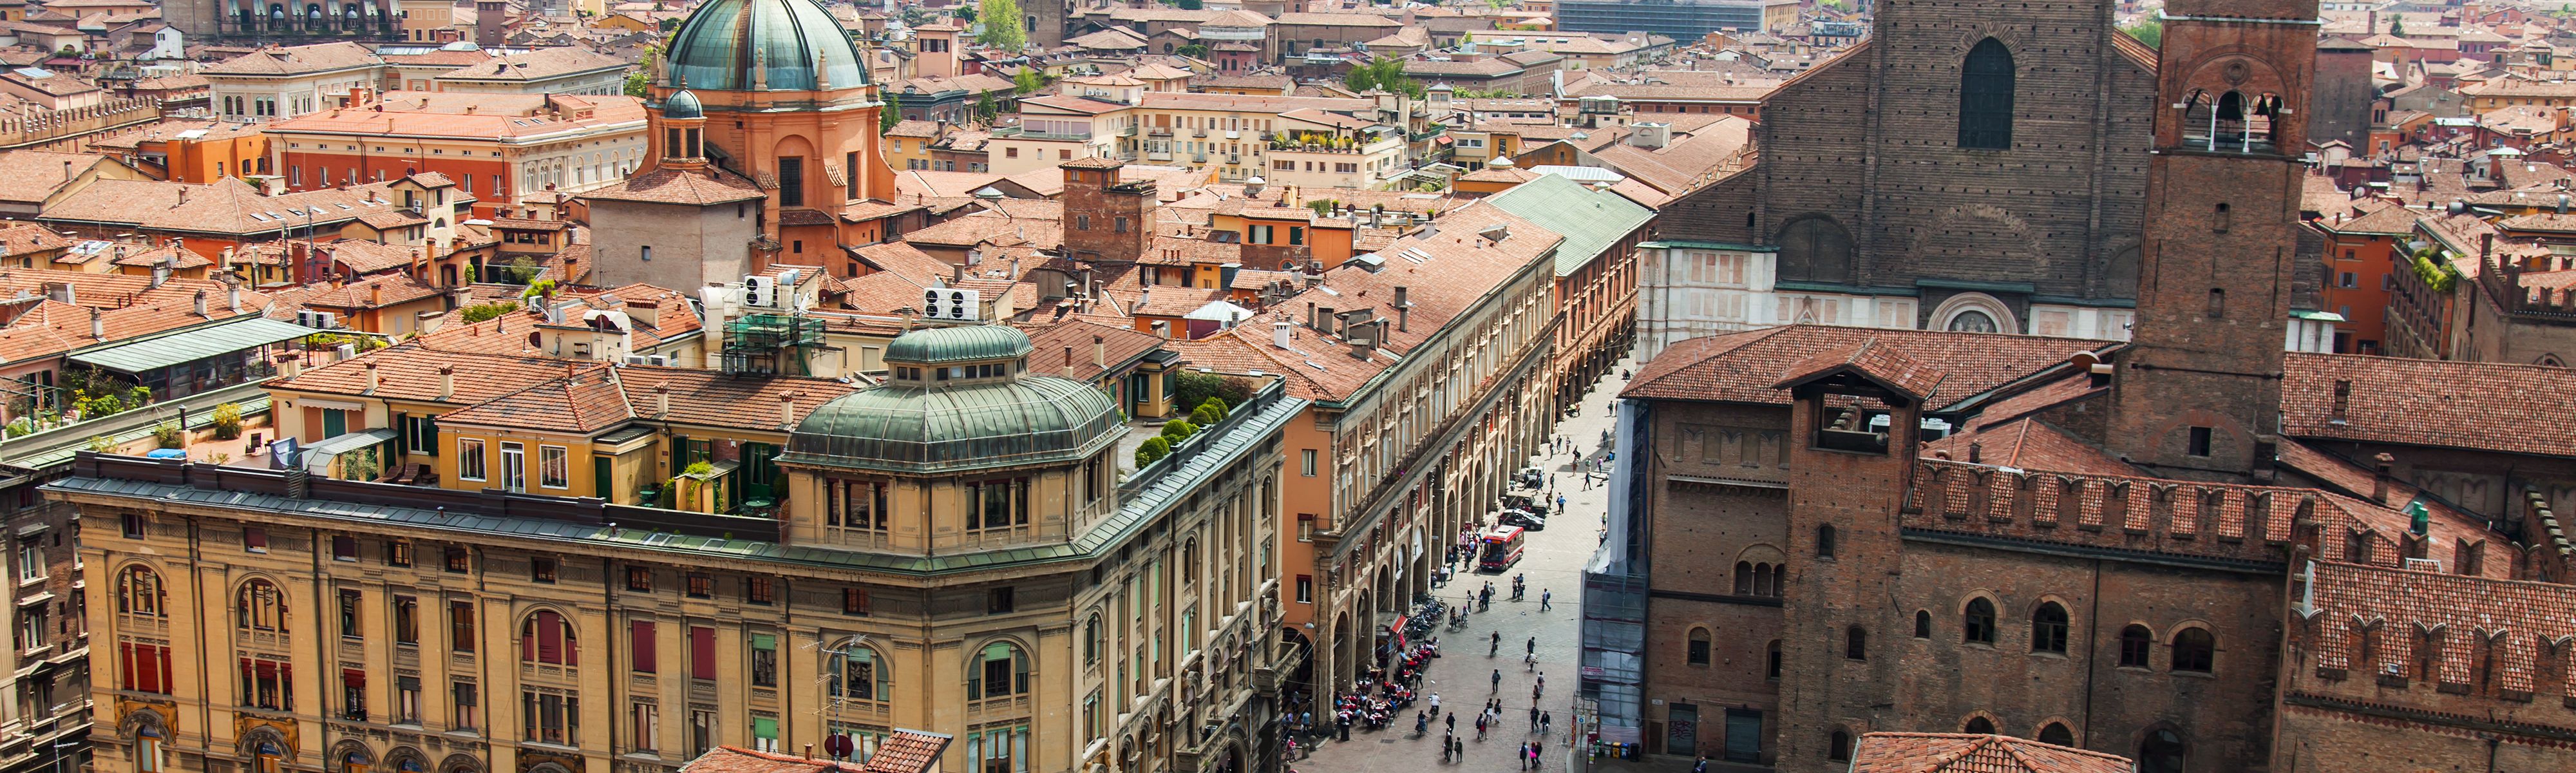 looking down at people walking on streets of bologna in italy